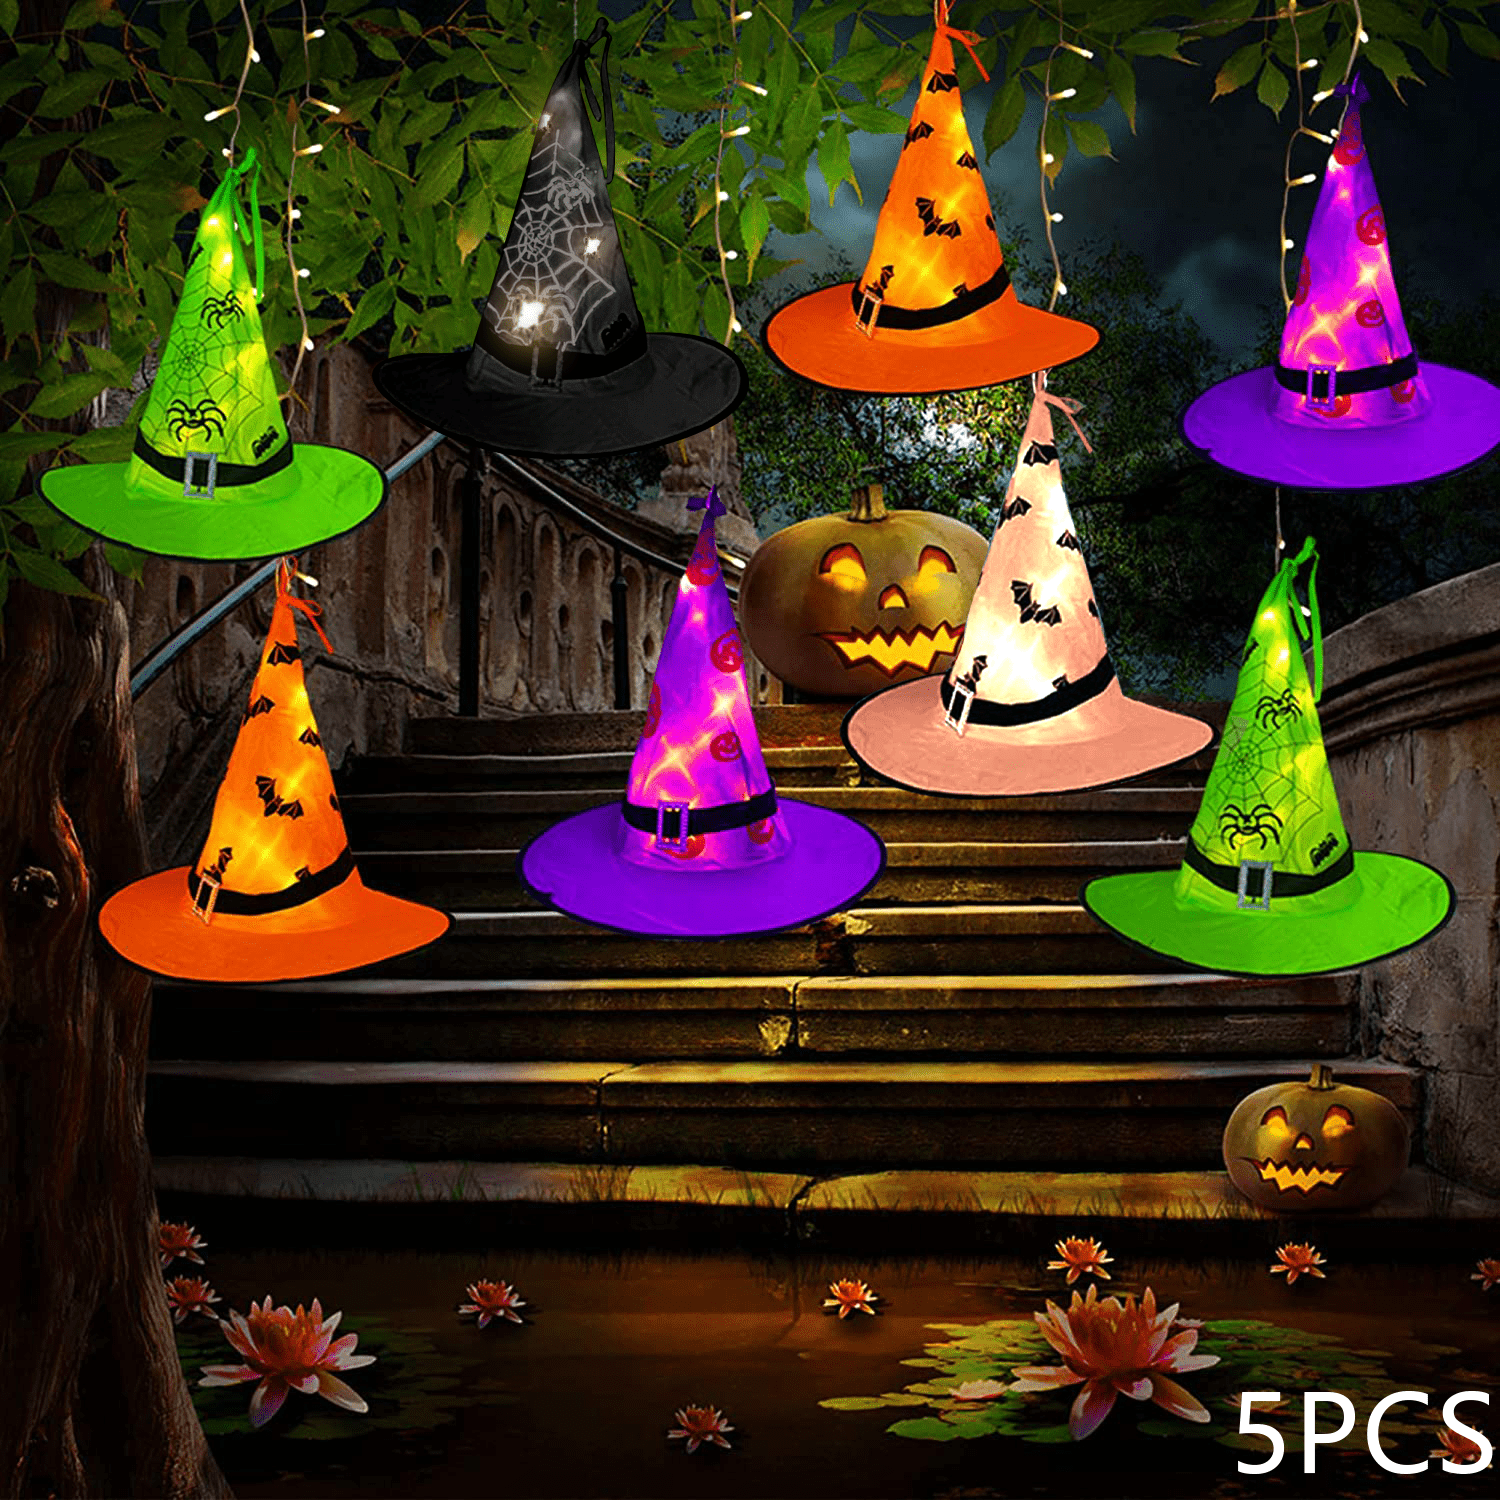 YEOLEH Halloween Decorations Lighted Witch Hats 5Pcs, Glowing ...